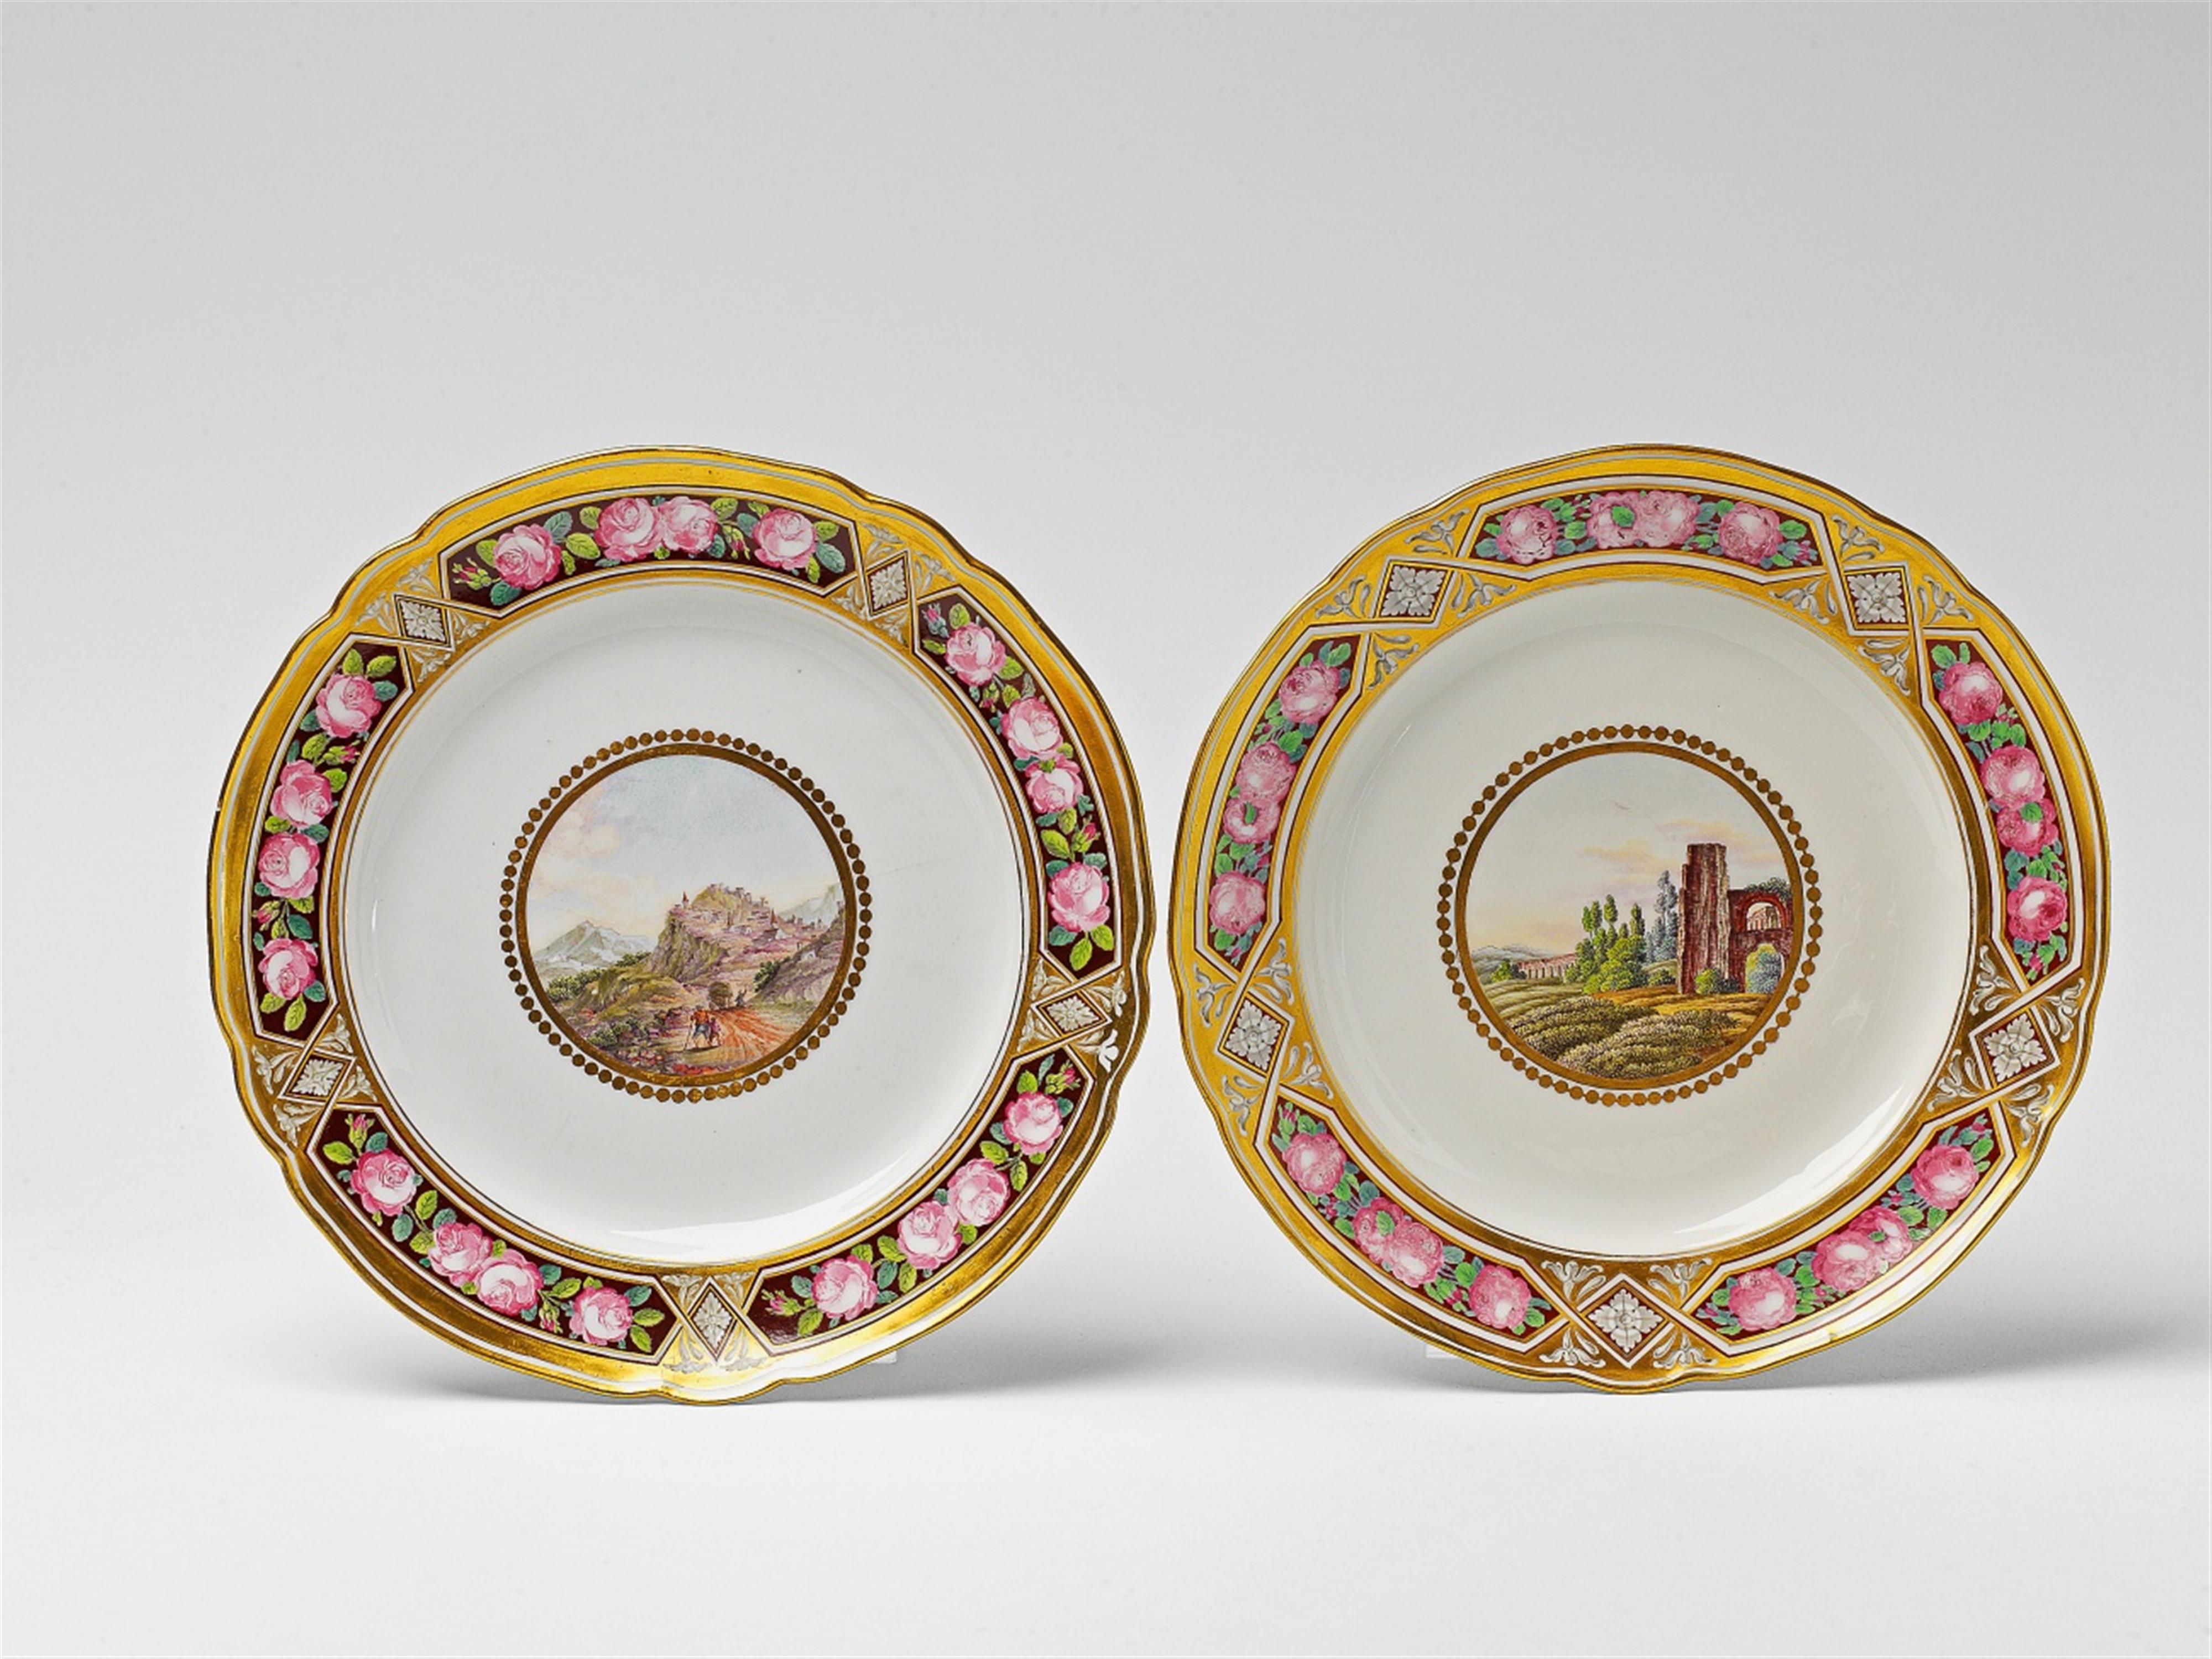 Two St. Petersburg porcelain plates from the wedding service of Grand Duchess Maria Pavlovna - image-4